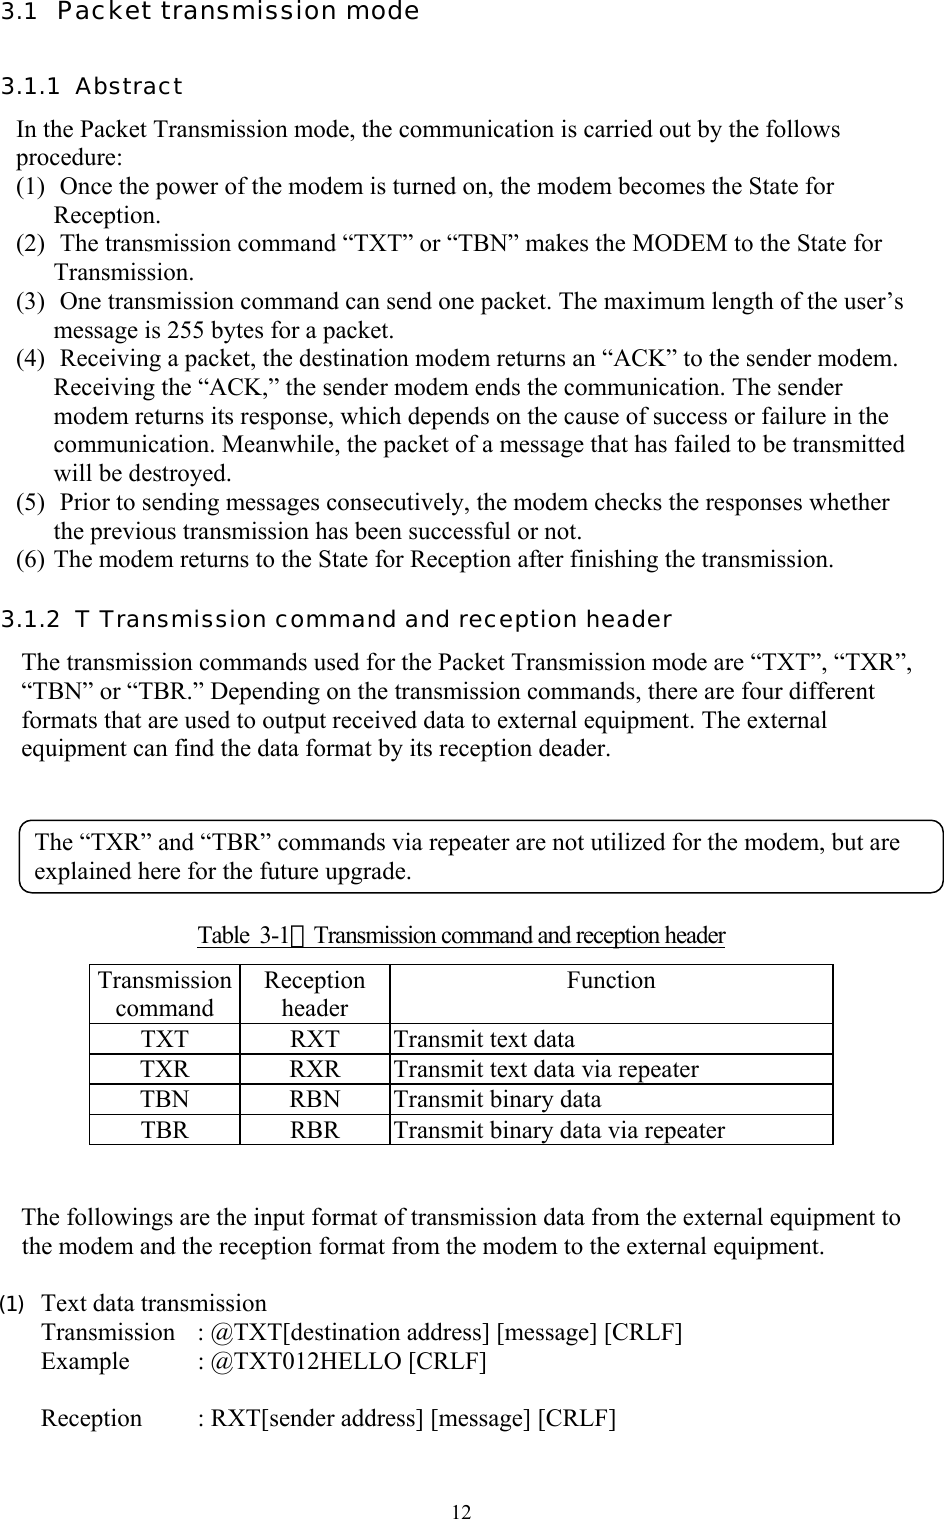  123.1  Packet transmission mode 3.1.1  Abstract In the Packet Transmission mode, the communication is carried out by the follows procedure:  (1)  Once the power of the modem is turned on, the modem becomes the State for Reception. (2)  The transmission command “TXT” or “TBN” makes the MODEM to the State for Transmission. (3)  One transmission command can send one packet. The maximum length of the user’s message is 255 bytes for a packet. (4)  Receiving a packet, the destination modem returns an “ACK” to the sender modem. Receiving the “ACK,” the sender modem ends the communication. The sender modem returns its response, which depends on the cause of success or failure in the communication. Meanwhile, the packet of a message that has failed to be transmitted will be destroyed.  (5)  Prior to sending messages consecutively, the modem checks the responses whether the previous transmission has been successful or not. (6) The modem returns to the State for Reception after finishing the transmission. 3.1.2  T Transmission command and reception header  The transmission commands used for the Packet Transmission mode are “TXT”, “TXR”, “TBN” or “TBR.” Depending on the transmission commands, there are four different formats that are used to output received data to external equipment. The external equipment can find the data format by its reception deader.       Table  3-1：Transmission command and reception header Transmission command Reception header Function  TXT  RXT  Transmit text data TXR  RXR  Transmit text data via repeater TBN  RBN  Transmit binary data TBR  RBR  Transmit binary data via repeater   The followings are the input format of transmission data from the external equipment to the modem and the reception format from the modem to the external equipment.   (1)  Text data transmission Transmission  : @TXT[destination address] [message] [CRLF] Example : @TXT012HELLO [CRLF]  Reception   : RXT[sender address] [message] [CRLF] The “TXR” and “TBR” commands via repeater are not utilized for the modem, but are explained here for the future upgrade. 